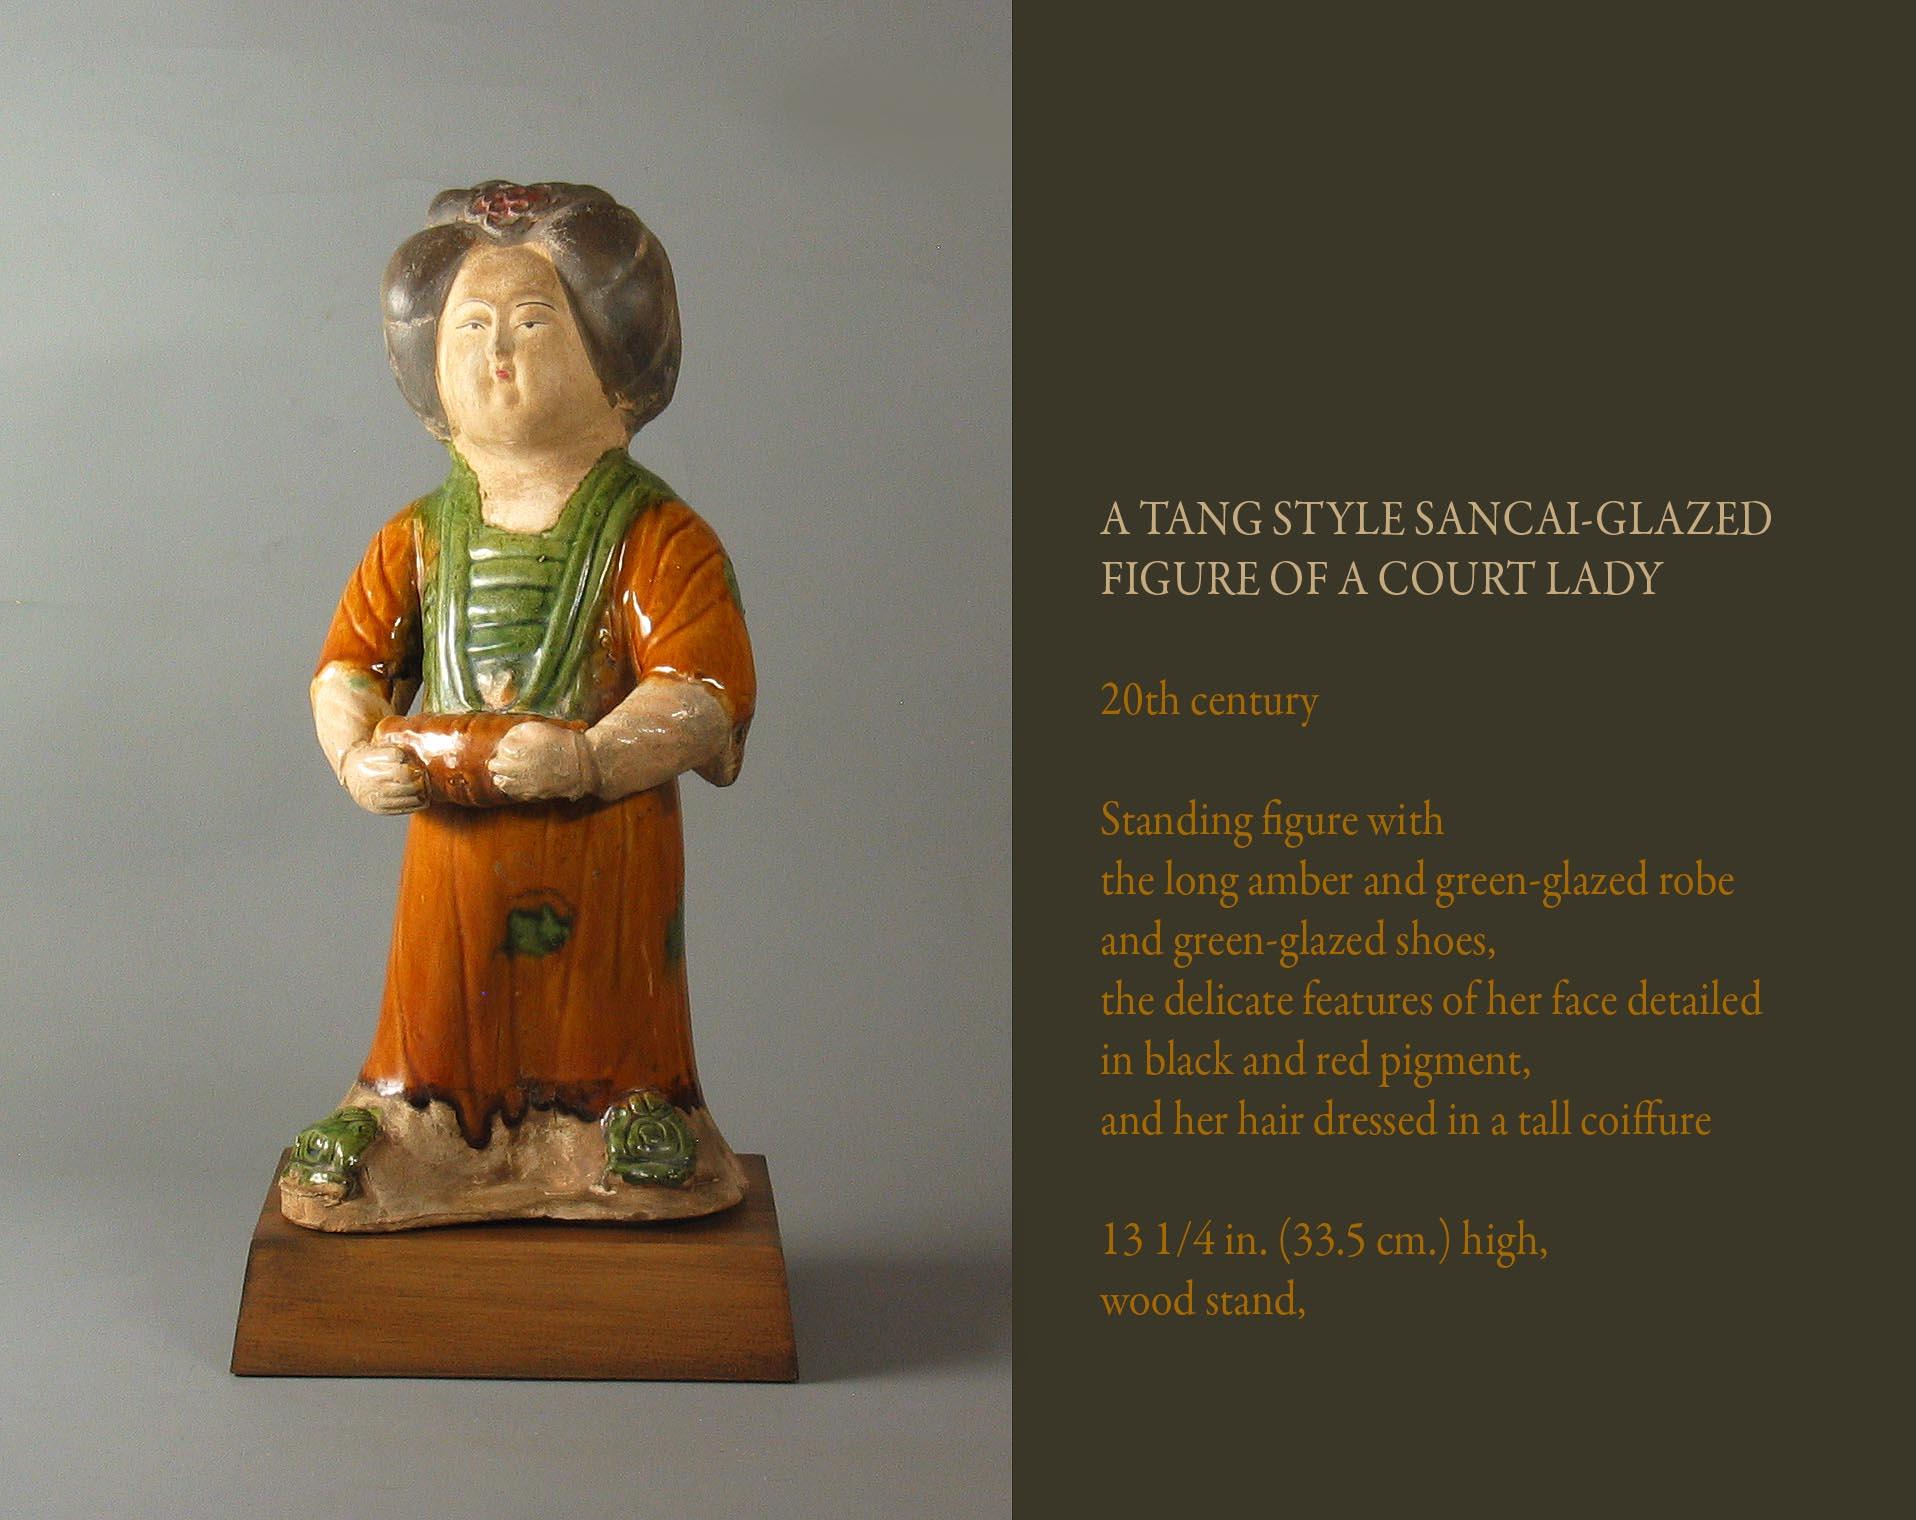 A Tang style Sancai-glazed
Figure of a Court Lady,

20th century.

Standing figure with 
the long amber and green-glazed robe 
and green-glazed shoes, 
the delicate features of her face detailed 
in black and red pigment, 
and her hair